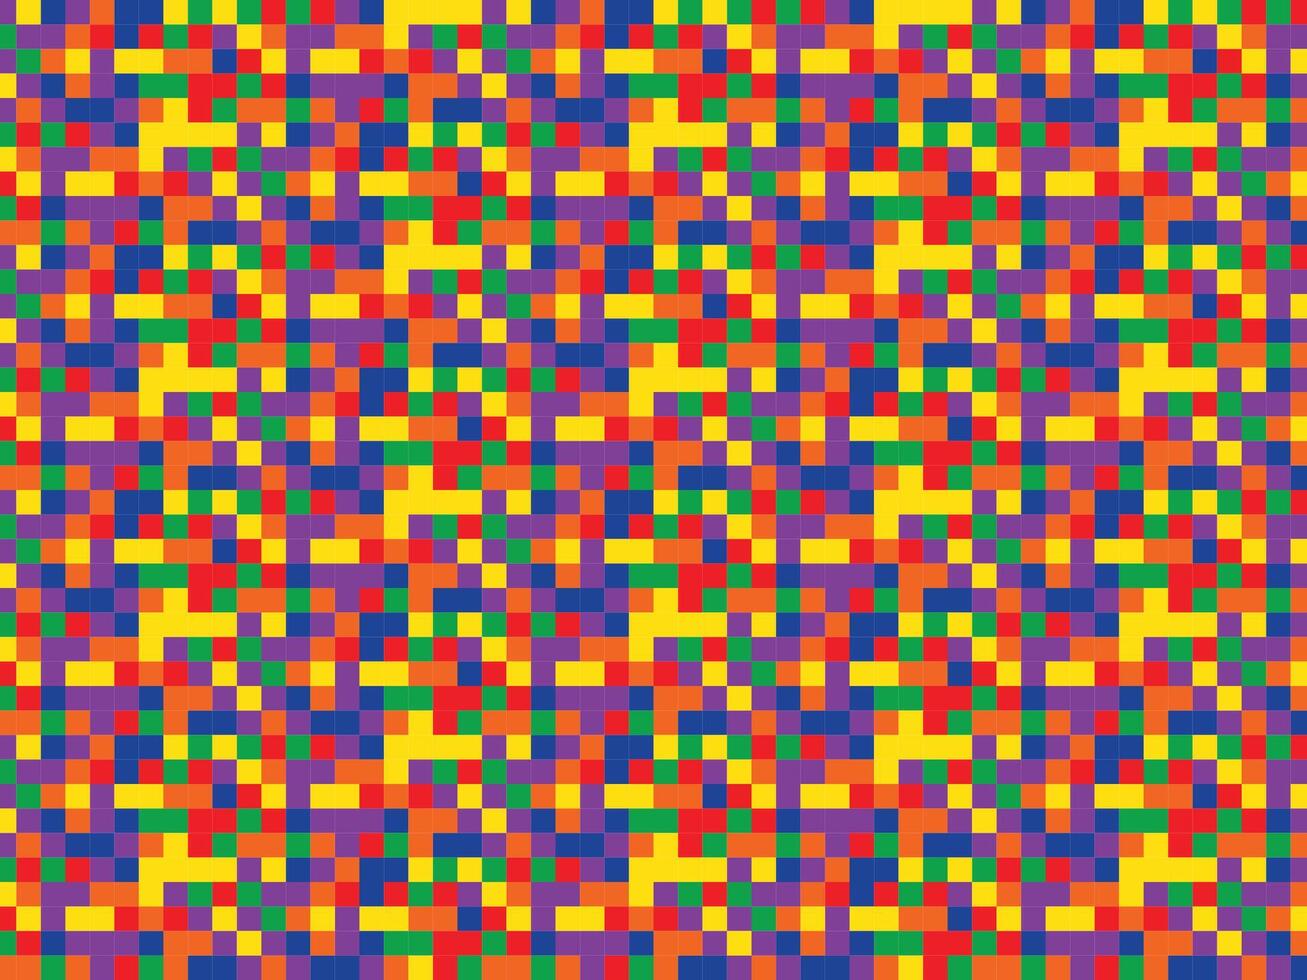 red and yellow pixel art background pattern vector